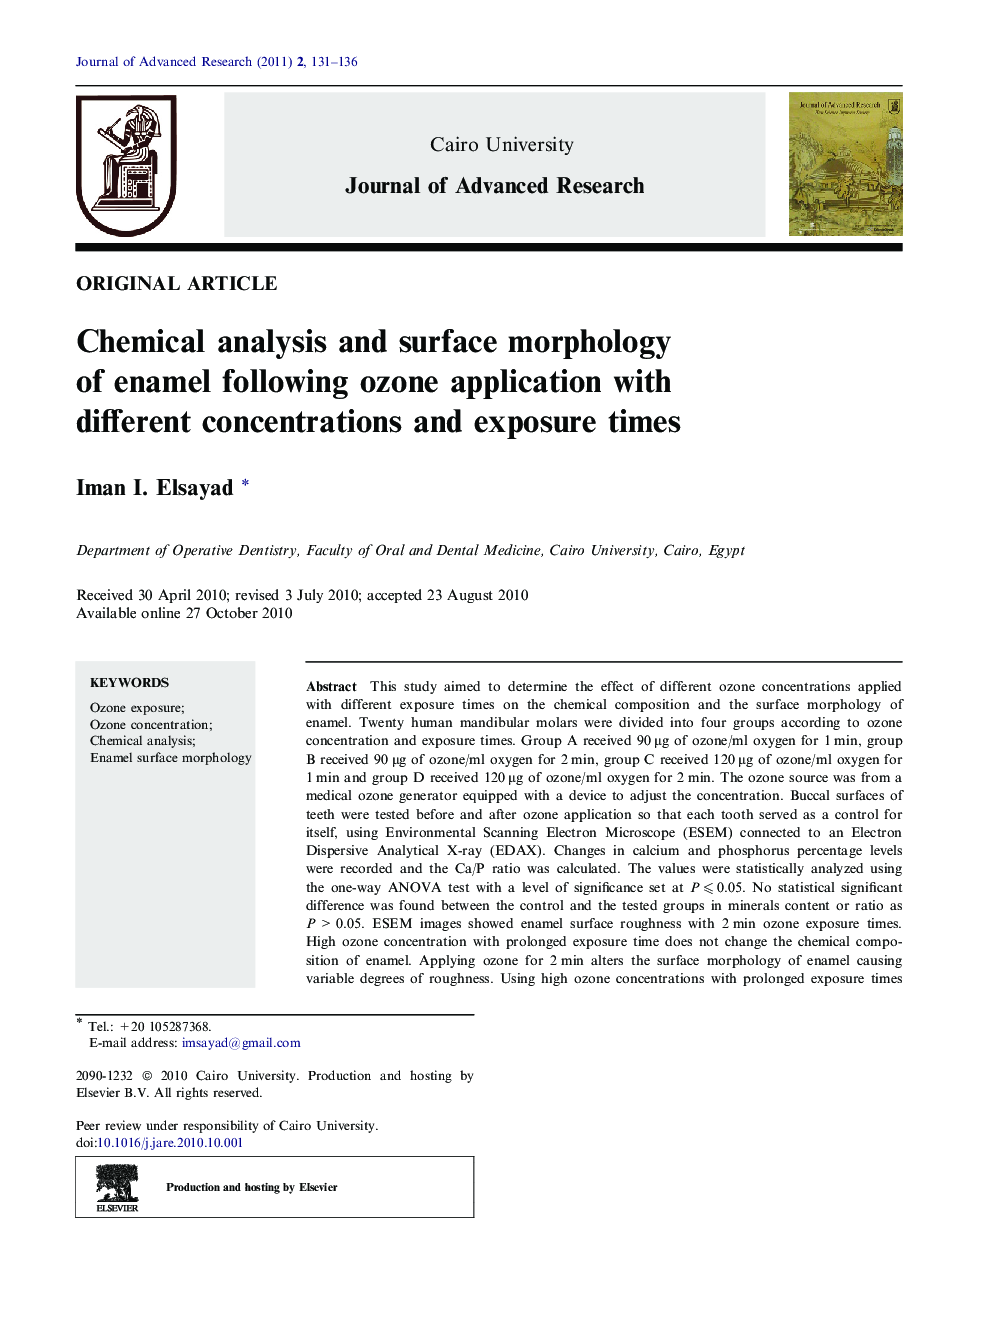 Chemical analysis and surface morphology of enamel following ozone application with different concentrations and exposure times